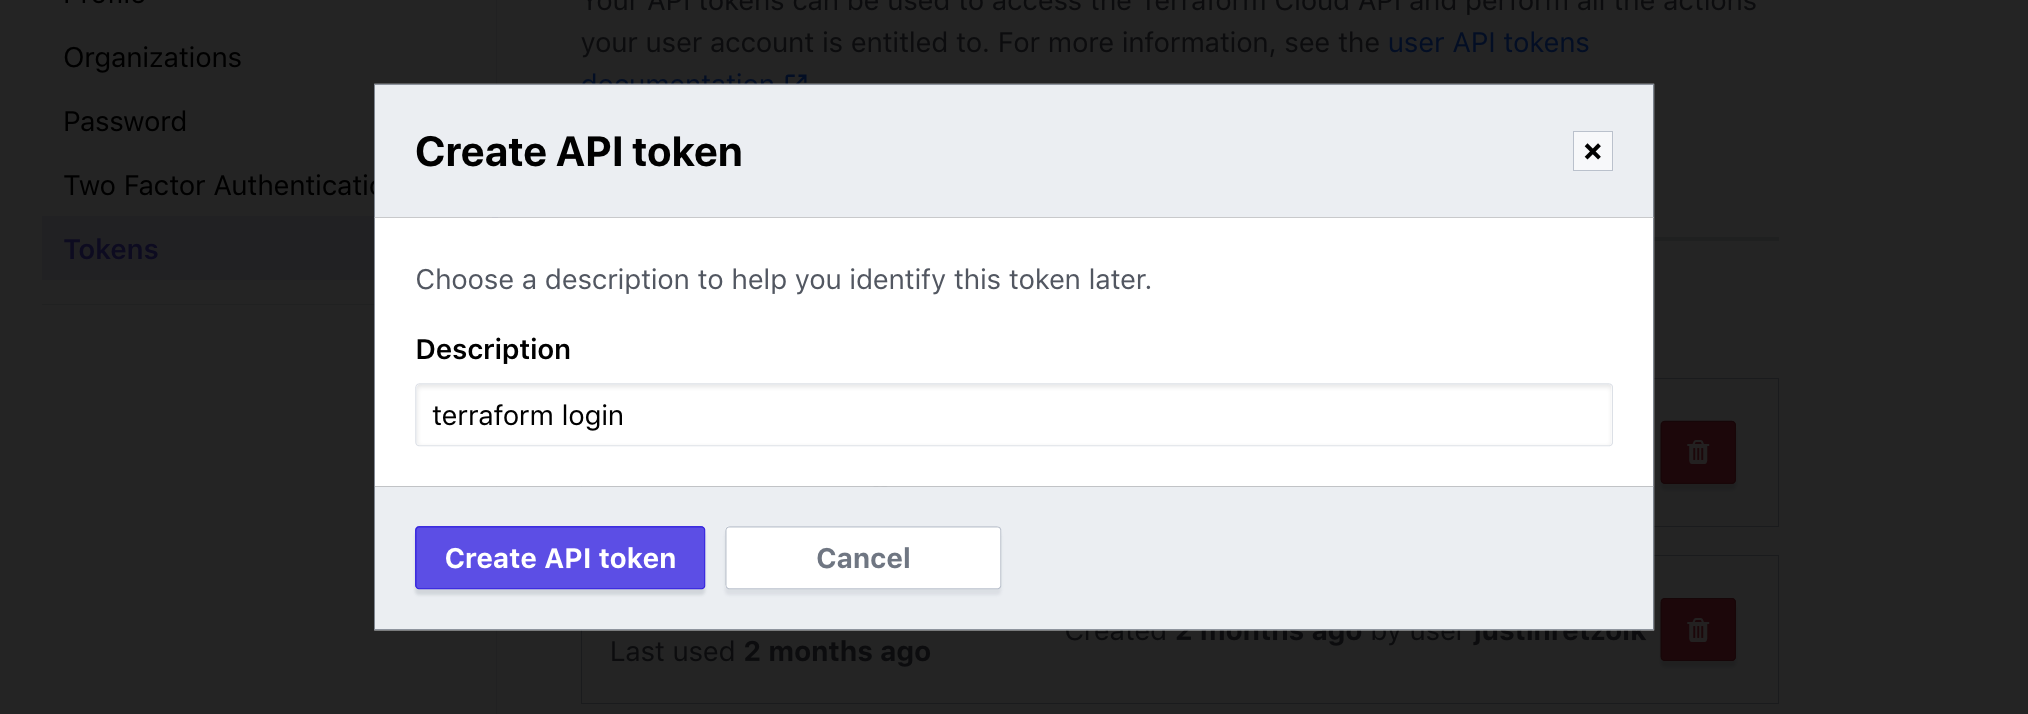 Modal window in Terraform Cloud titled "Create API token". There is a text box to set a name for the token.